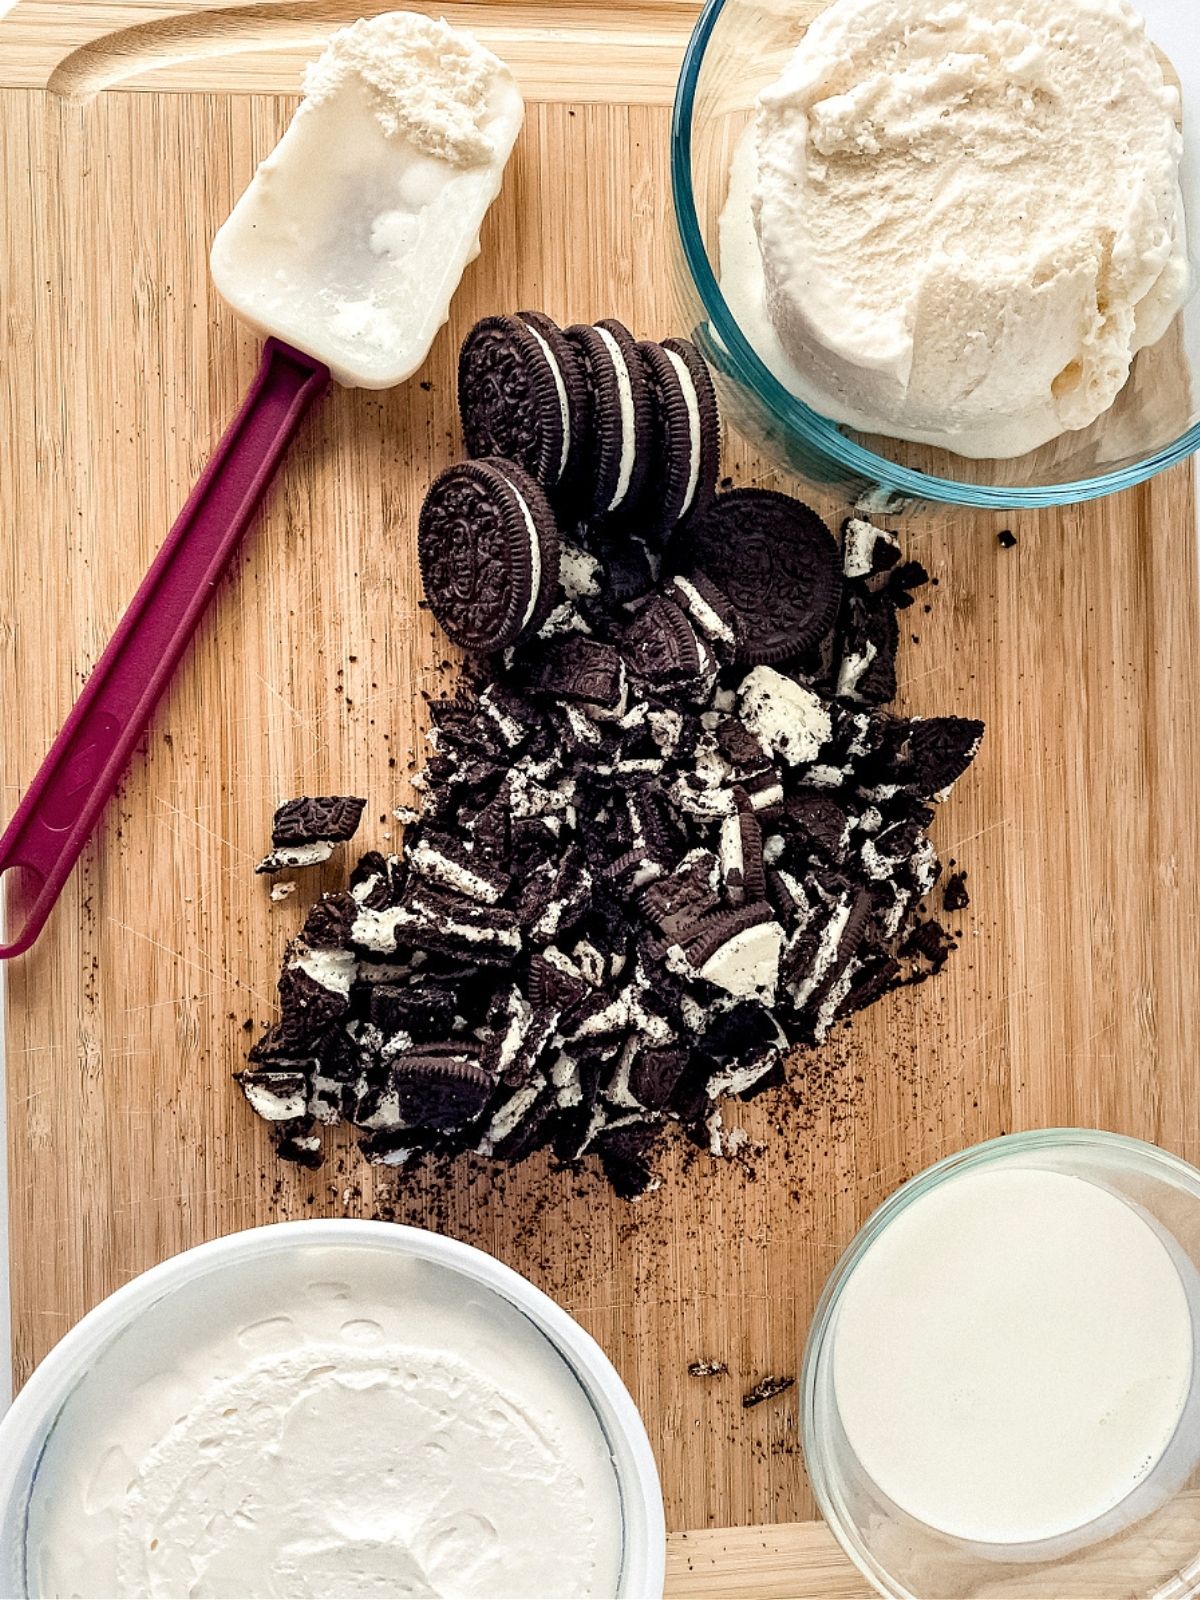 Oreo McFlurry ingredients which include crushed oreo cookies, whipped topping, half and half, and vanilla ice cream.